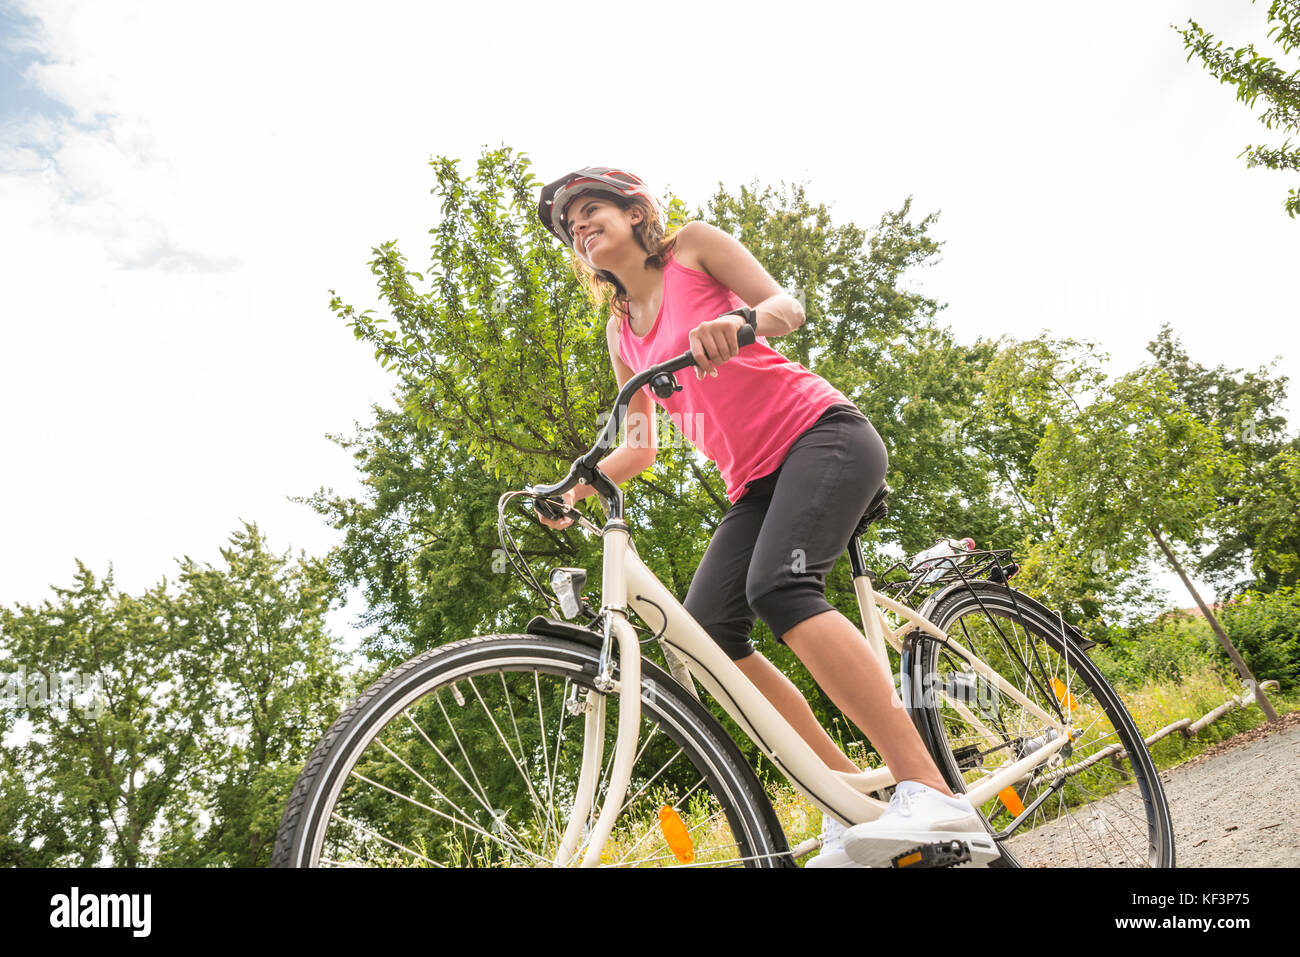 Low Angle View Of A Happy Young Female Cyclist Riding Bicycle Stock Photo